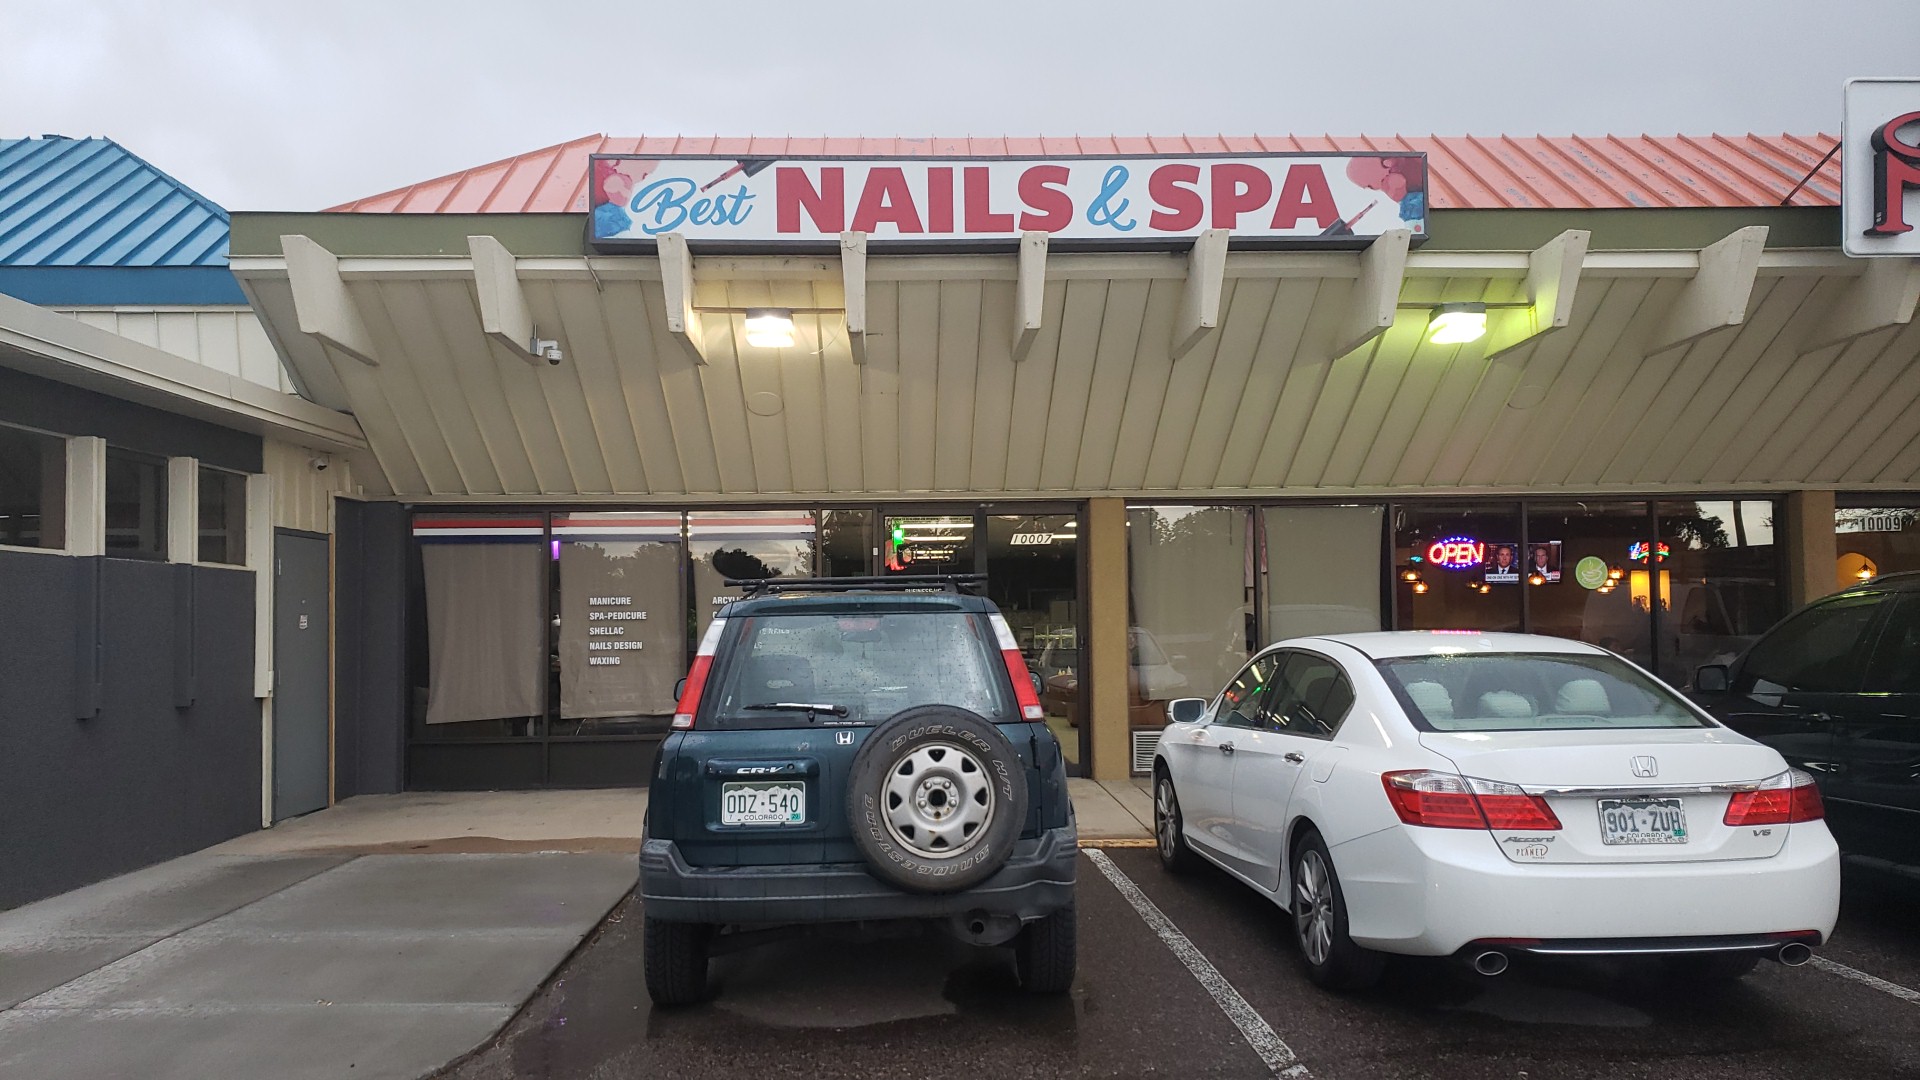 Best Nail and Spa